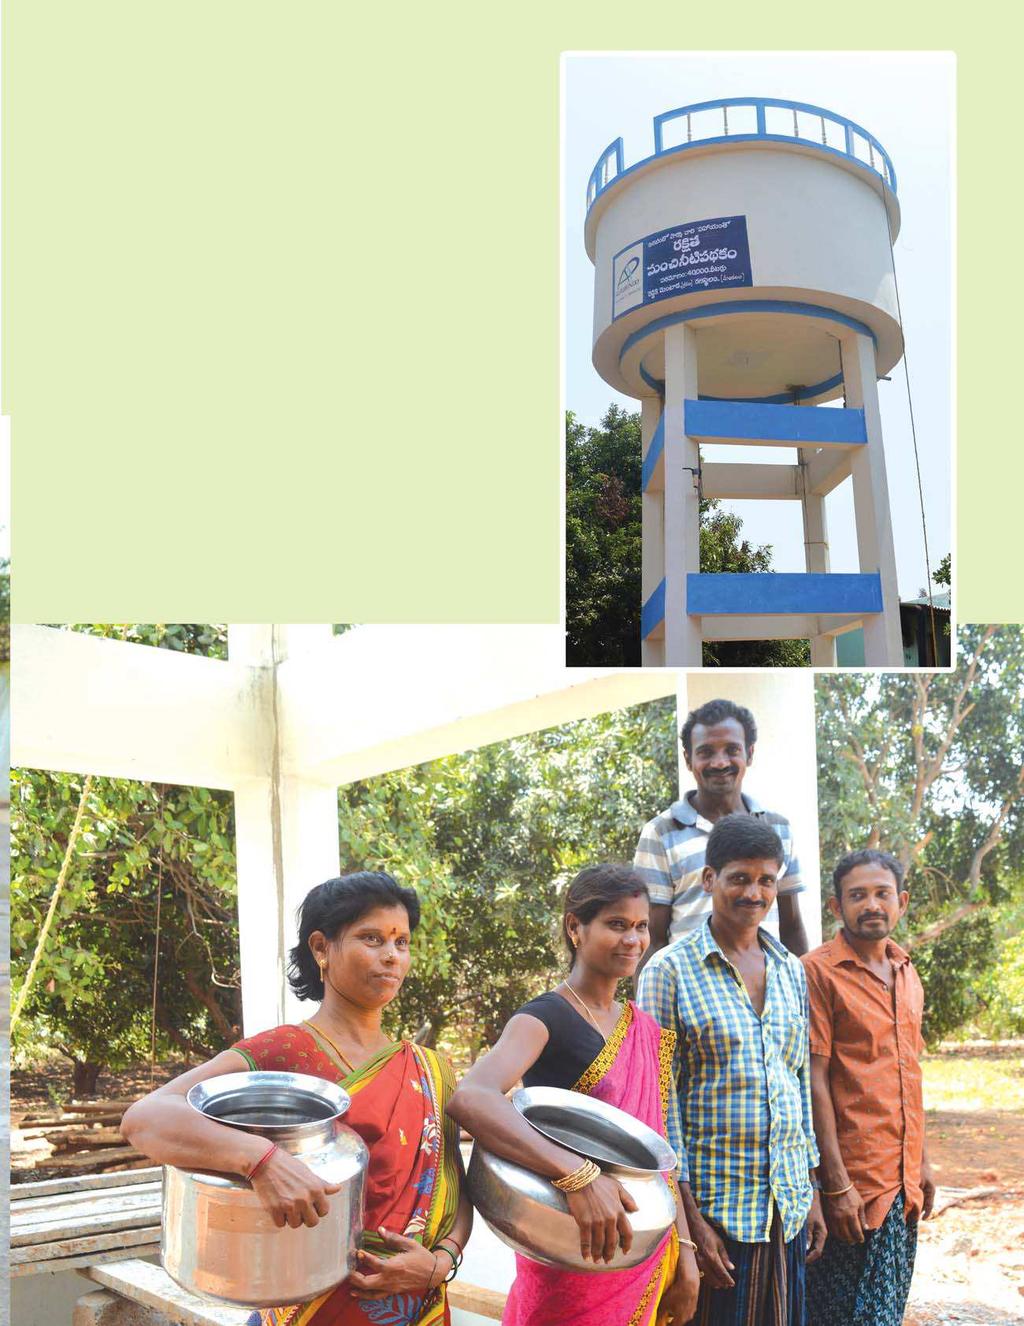 Drinking water issue resolved Sanyasamma, Durgamma, Bhaskar Reddy and Jampaiah, Mentada of Ranasthalammandal in Srikakulum district said that there are 300 households in their village.